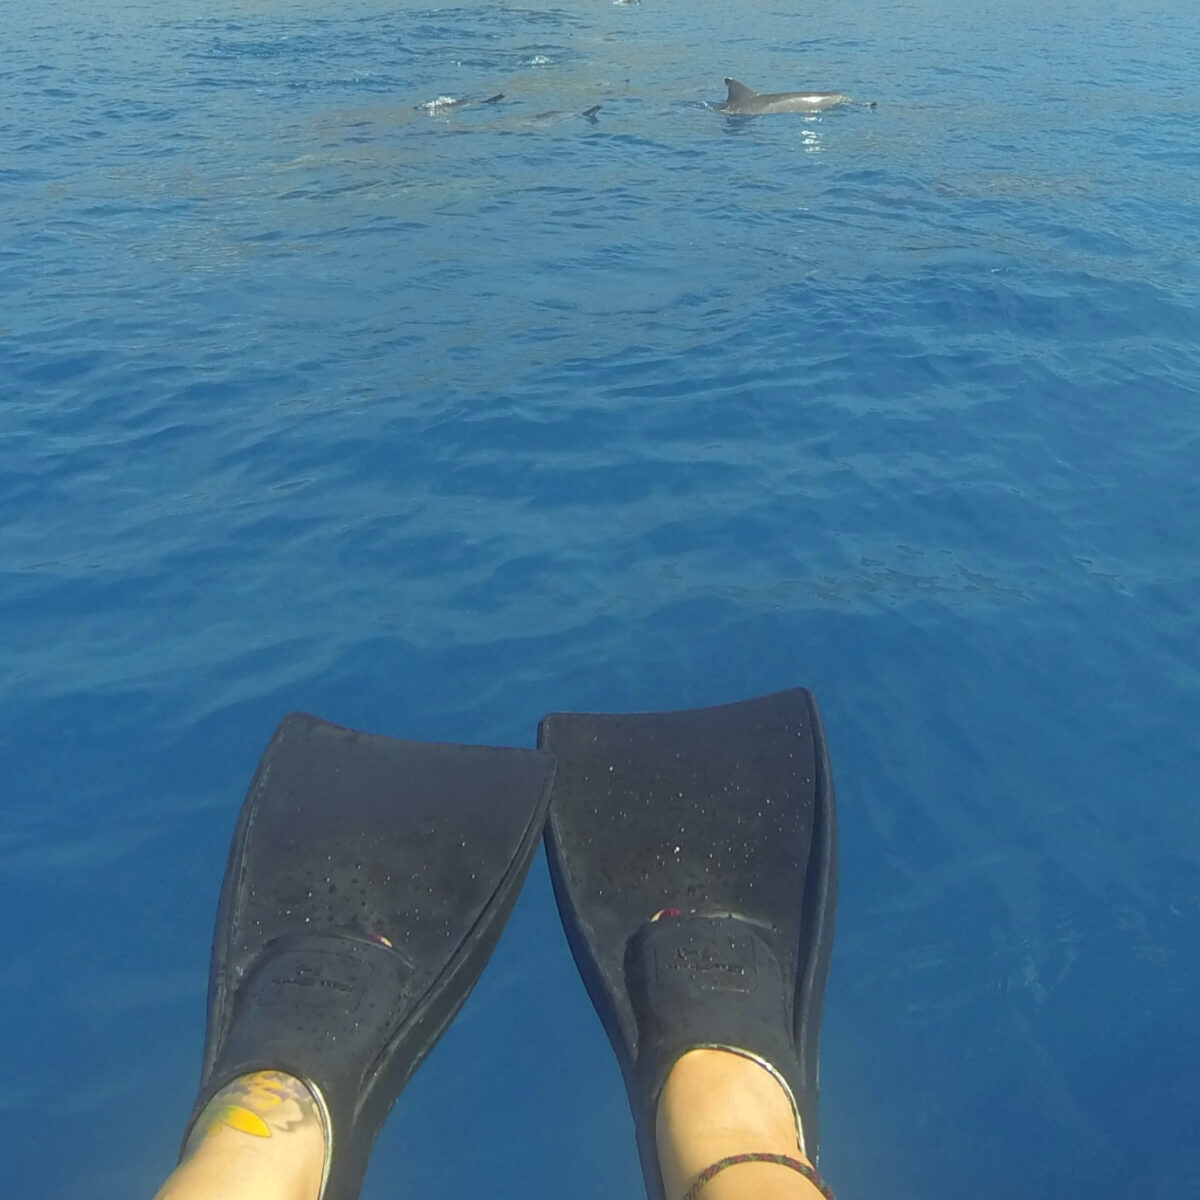 dolphin excursion Hawaii. Swim with dolphins hawaii